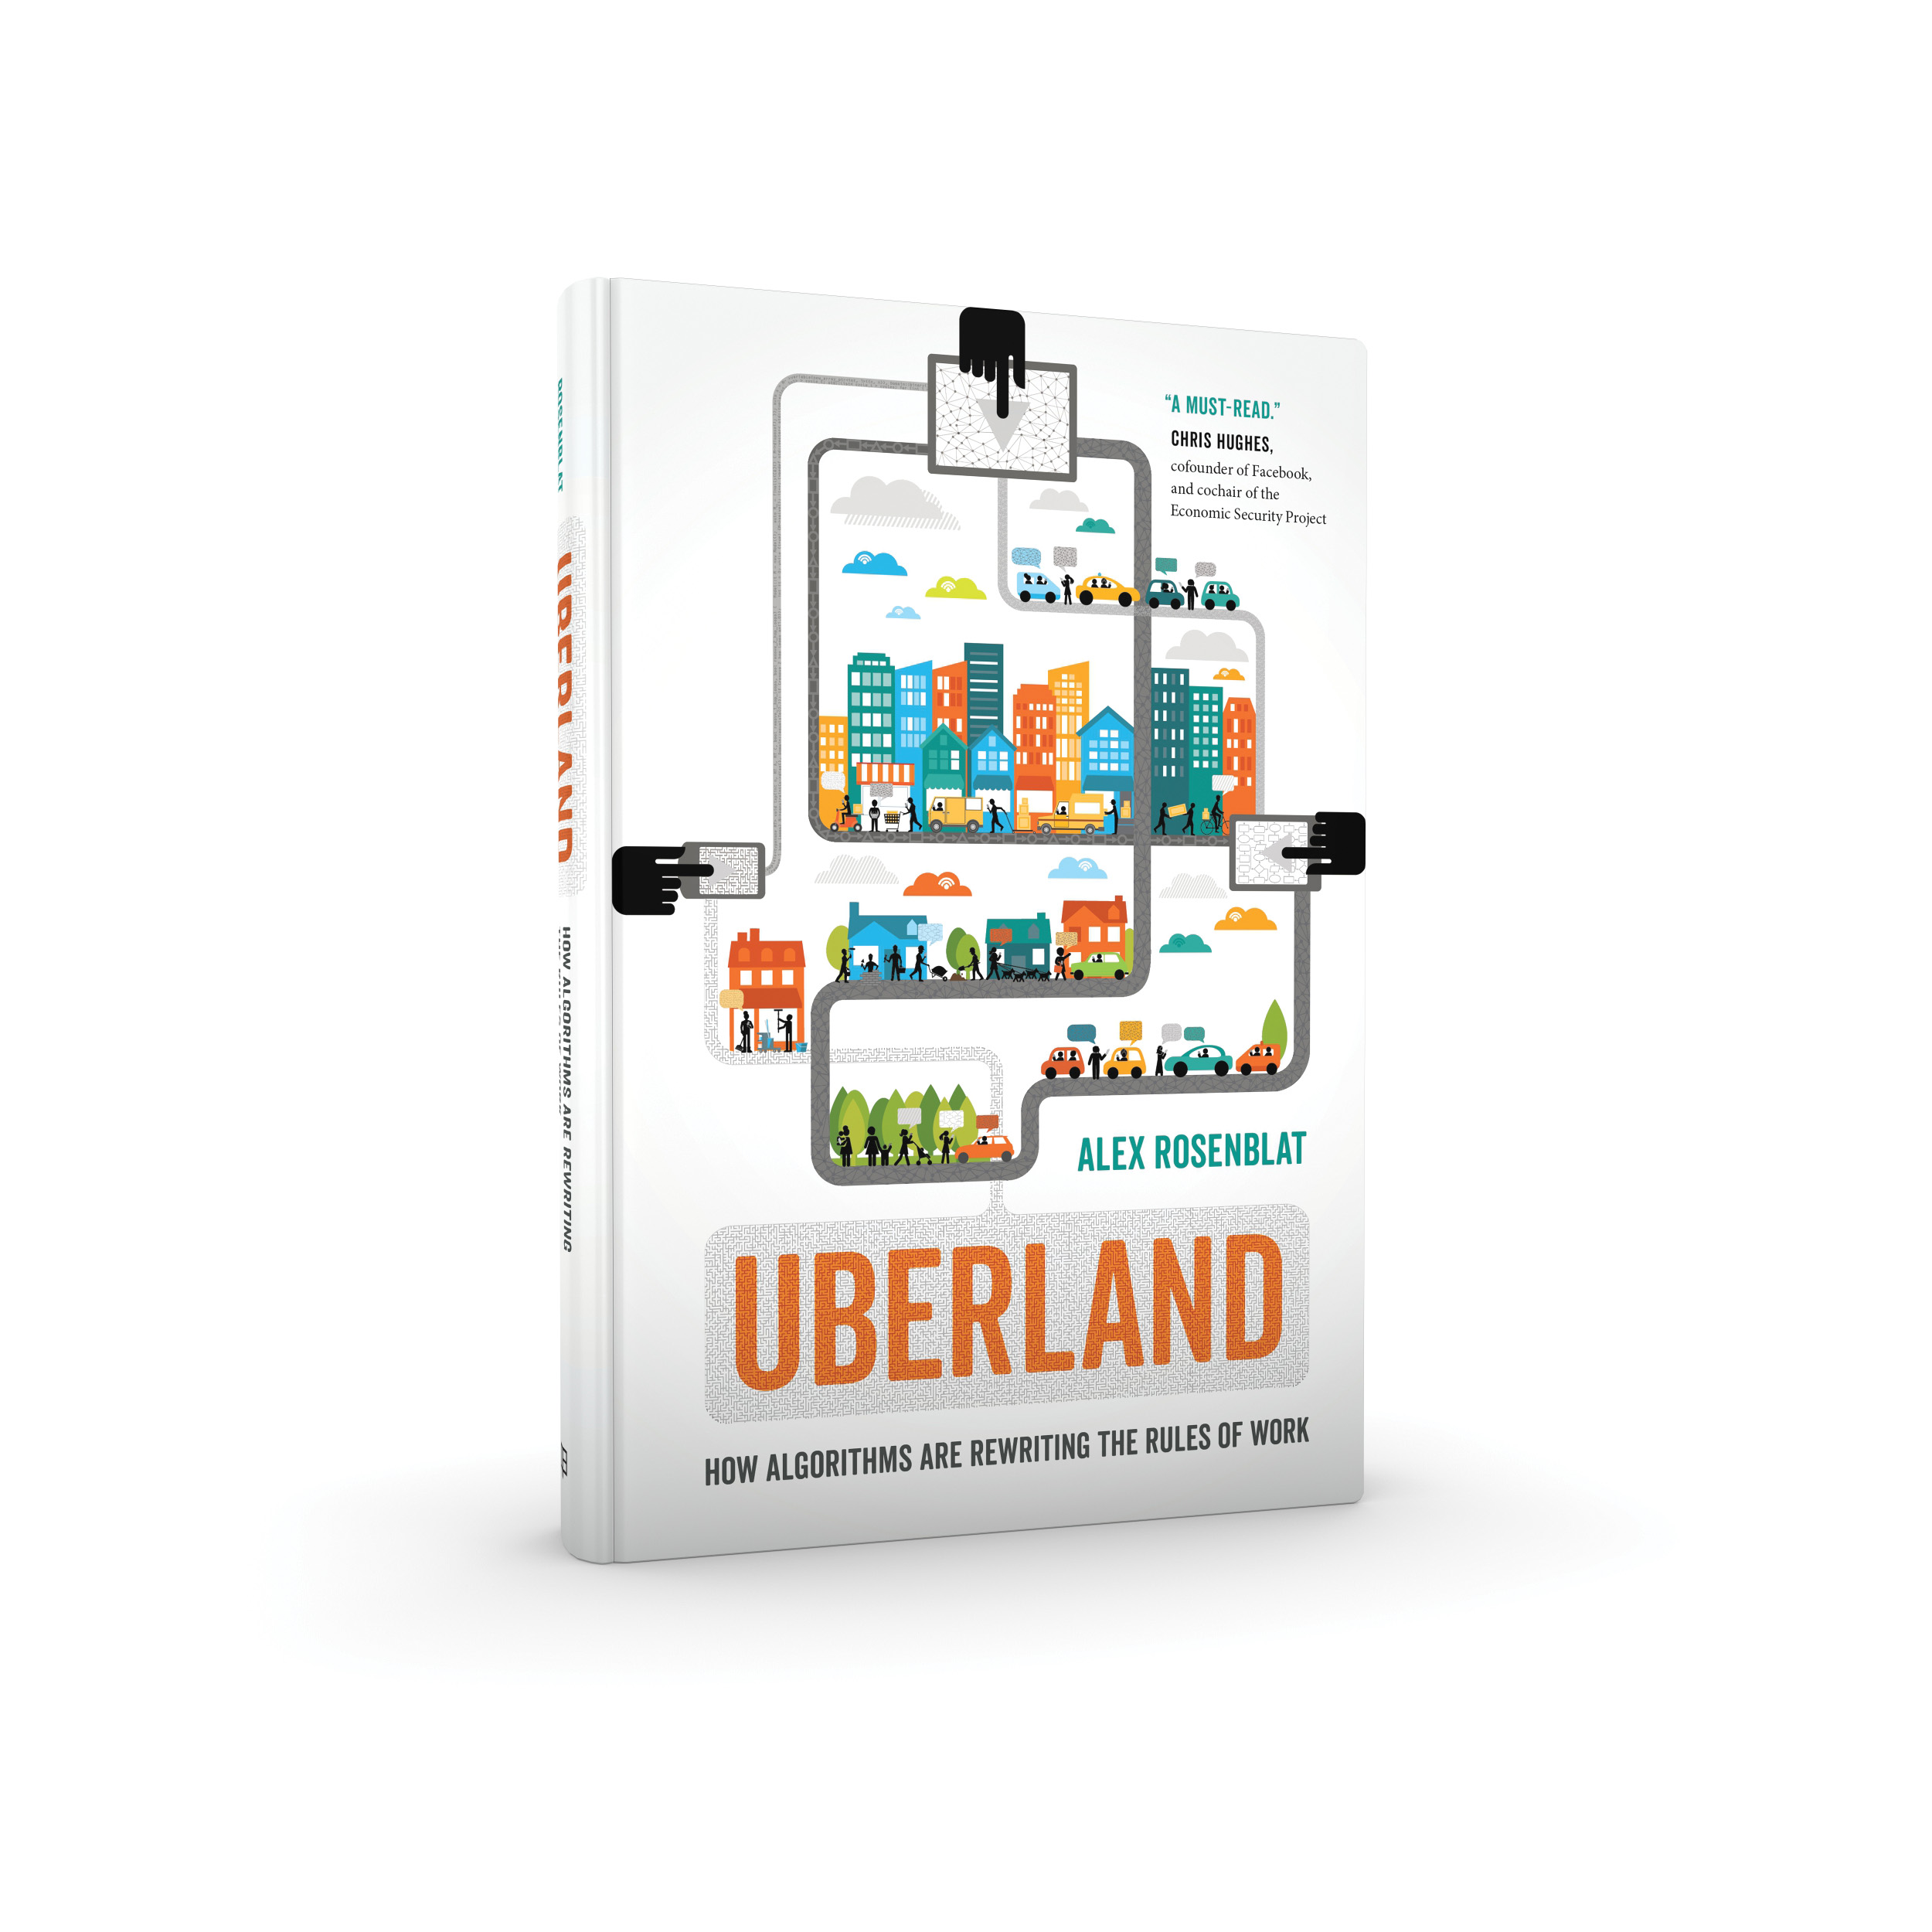 [cover of the book Uberland by Queen's grad Alex Rosenblat]